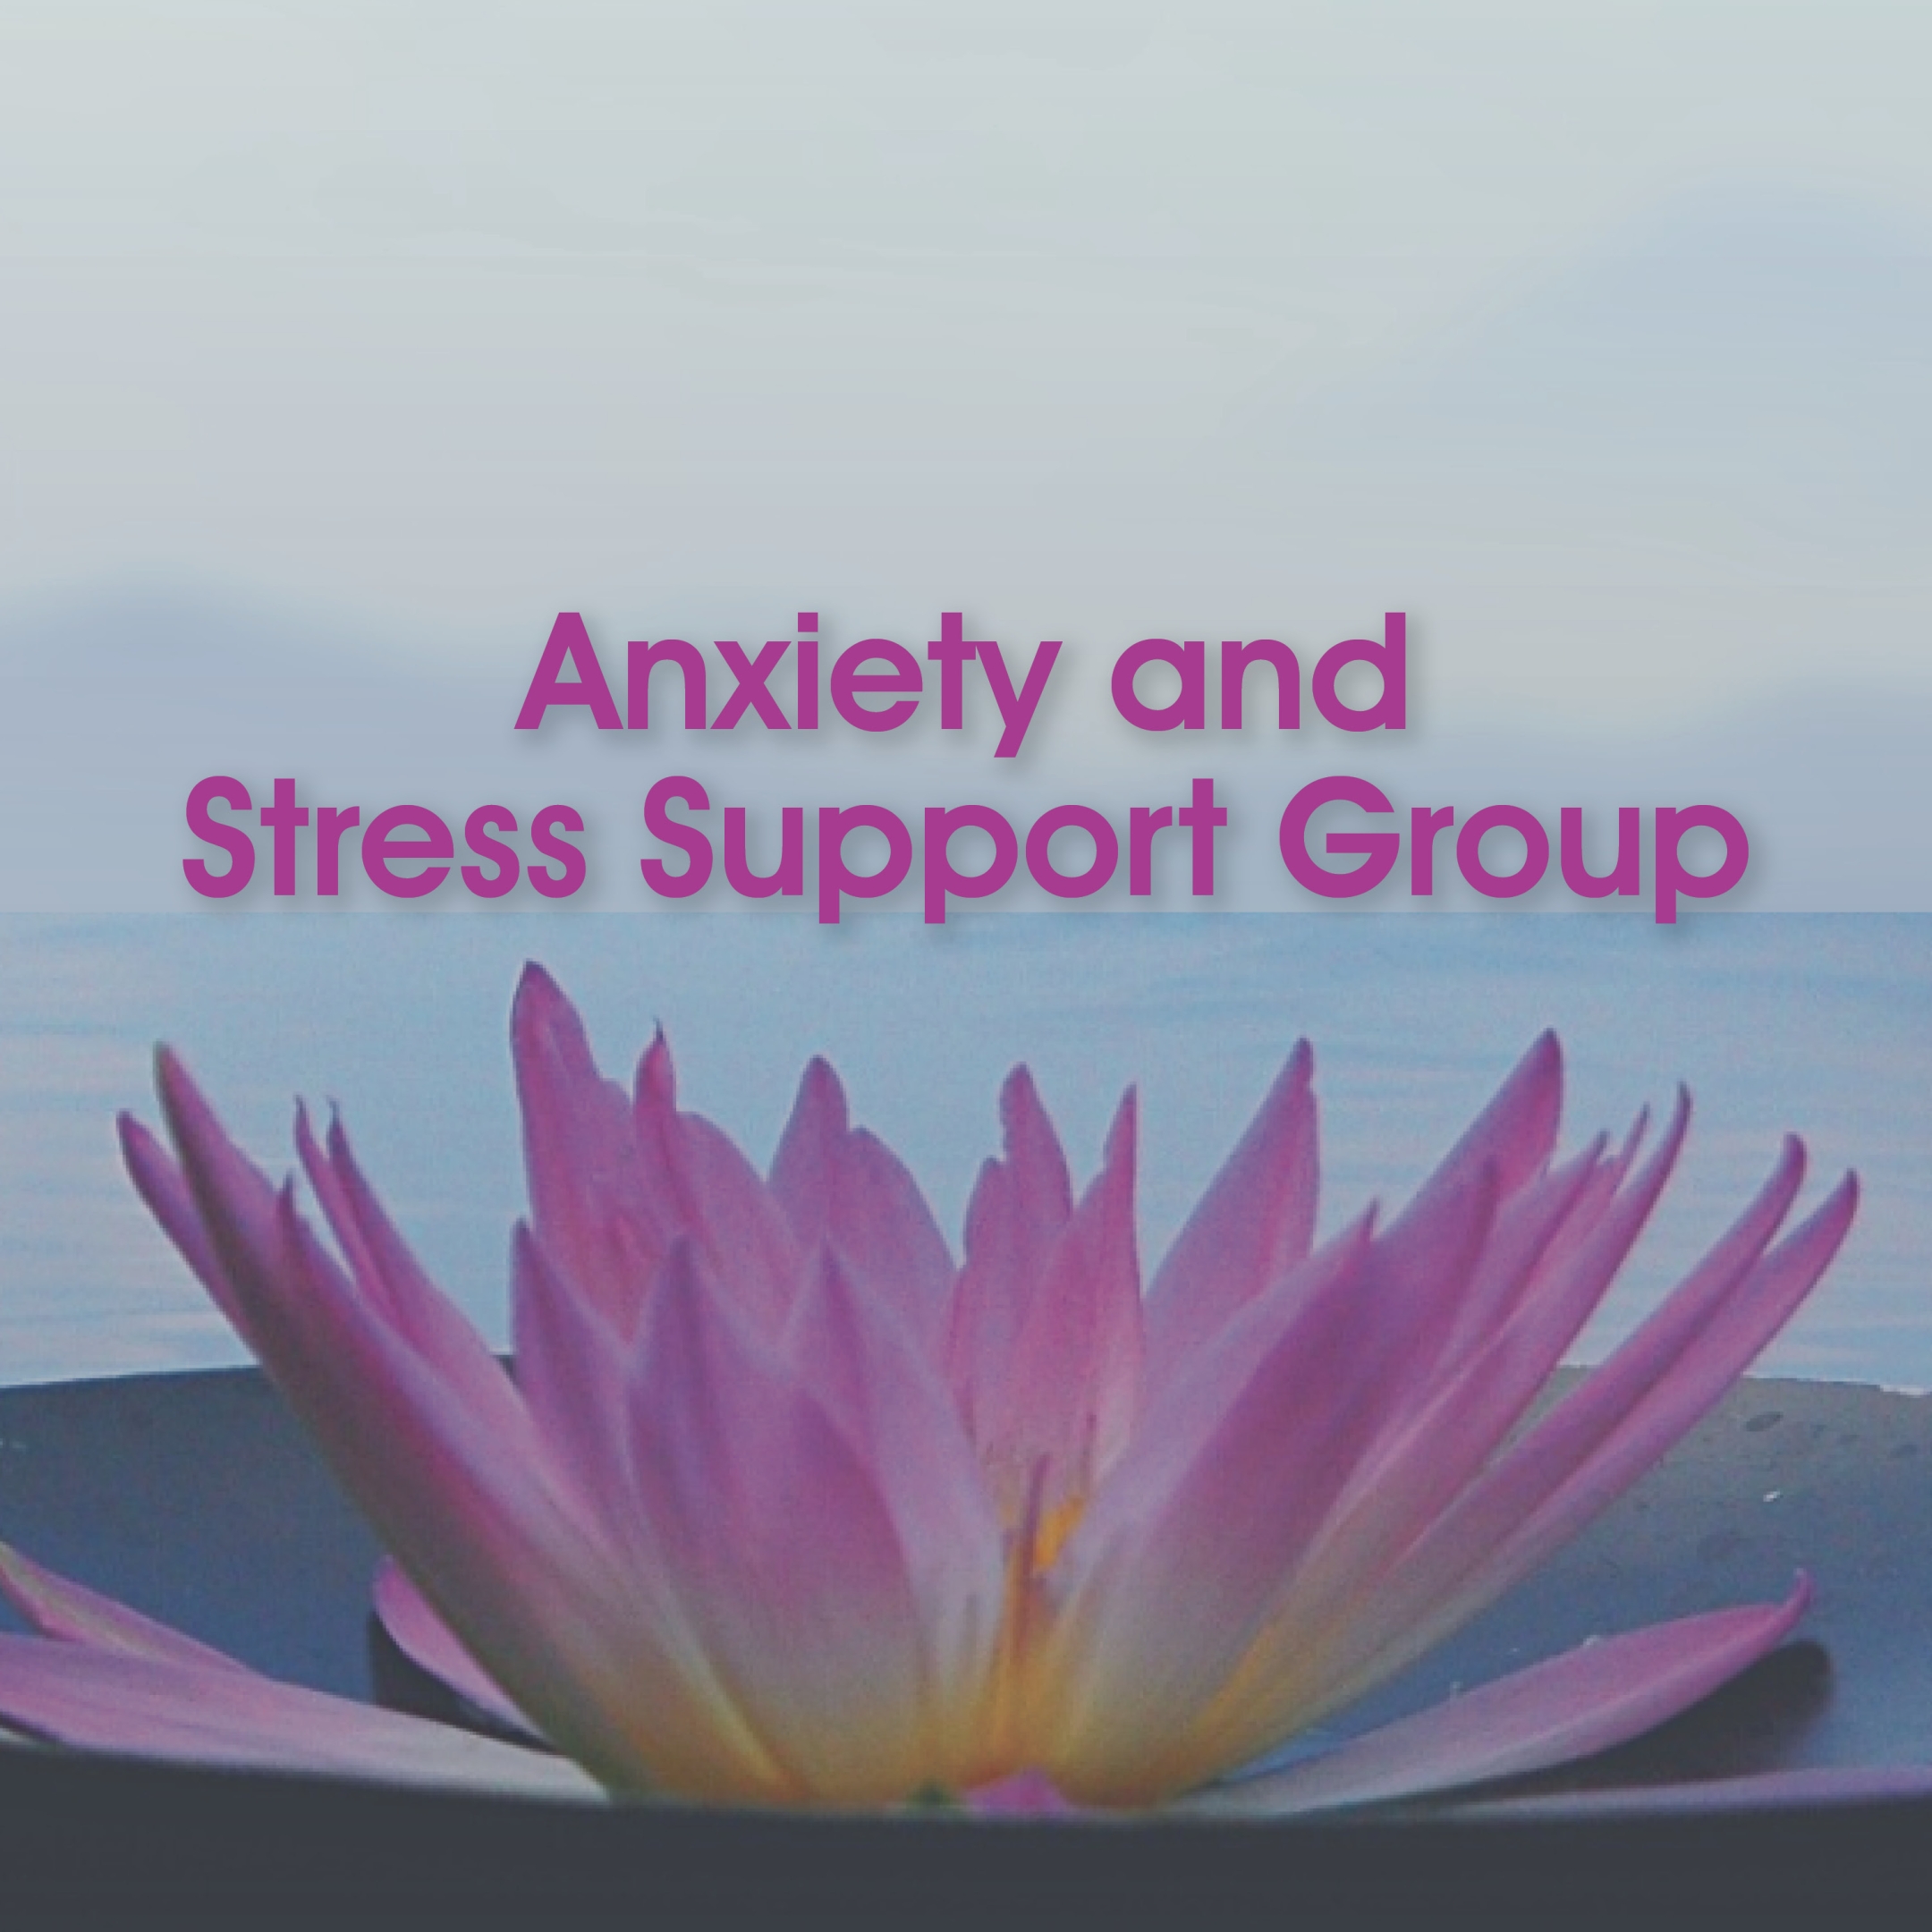 Anxiety and Stress Support Group